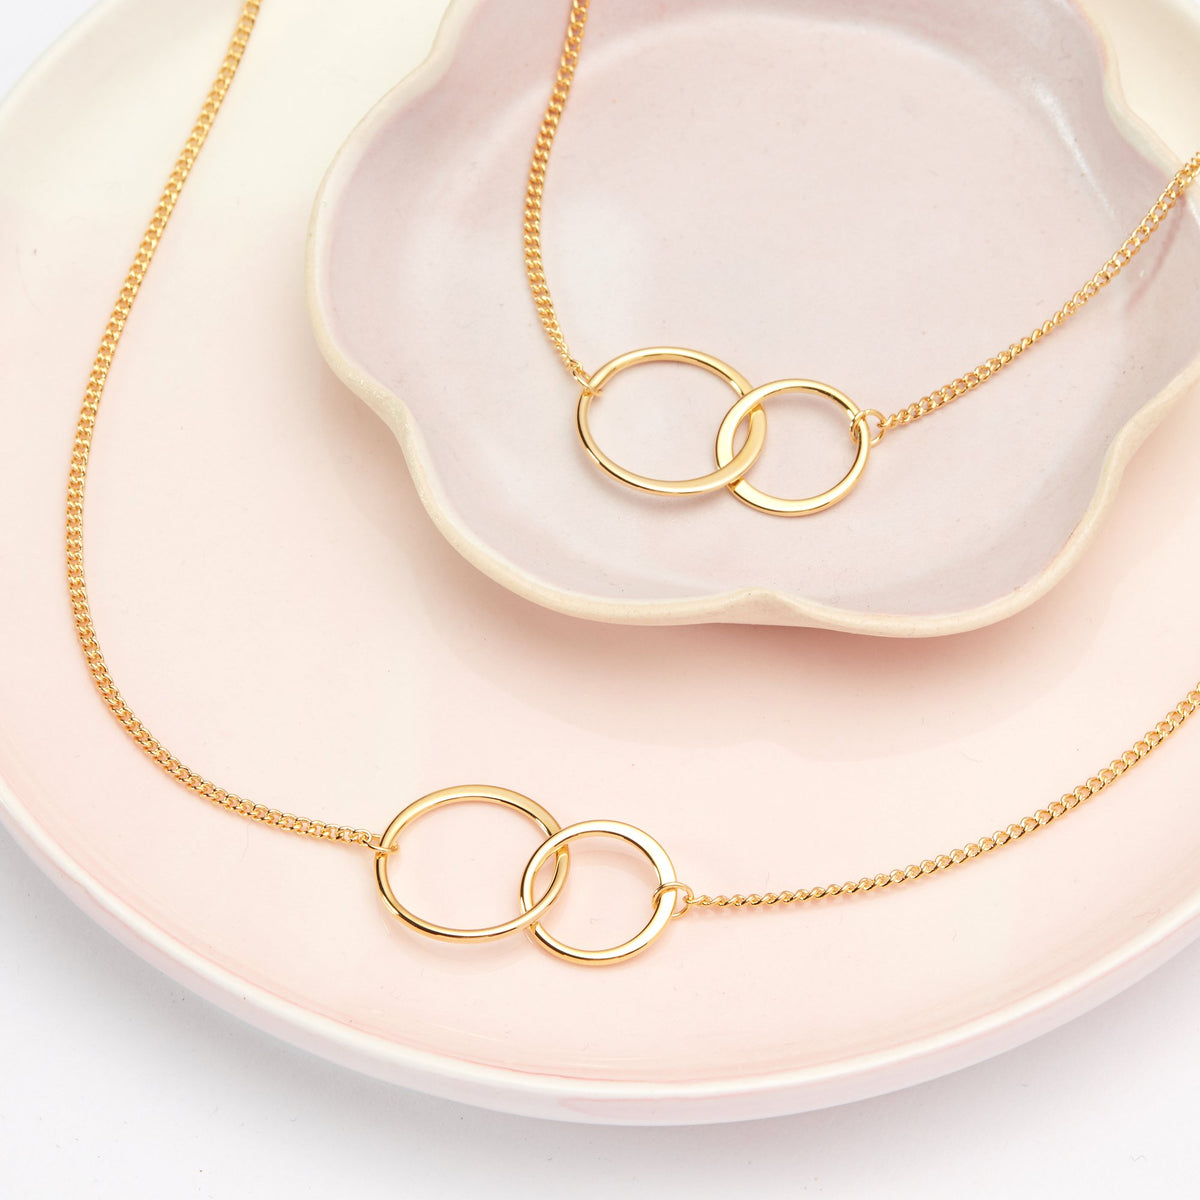 Christmas Gift for Mom NecklaceBest Personalized Xmas Gifts, Holiday Presents, 2 Interlocking Circles, Set of 2 / Gold